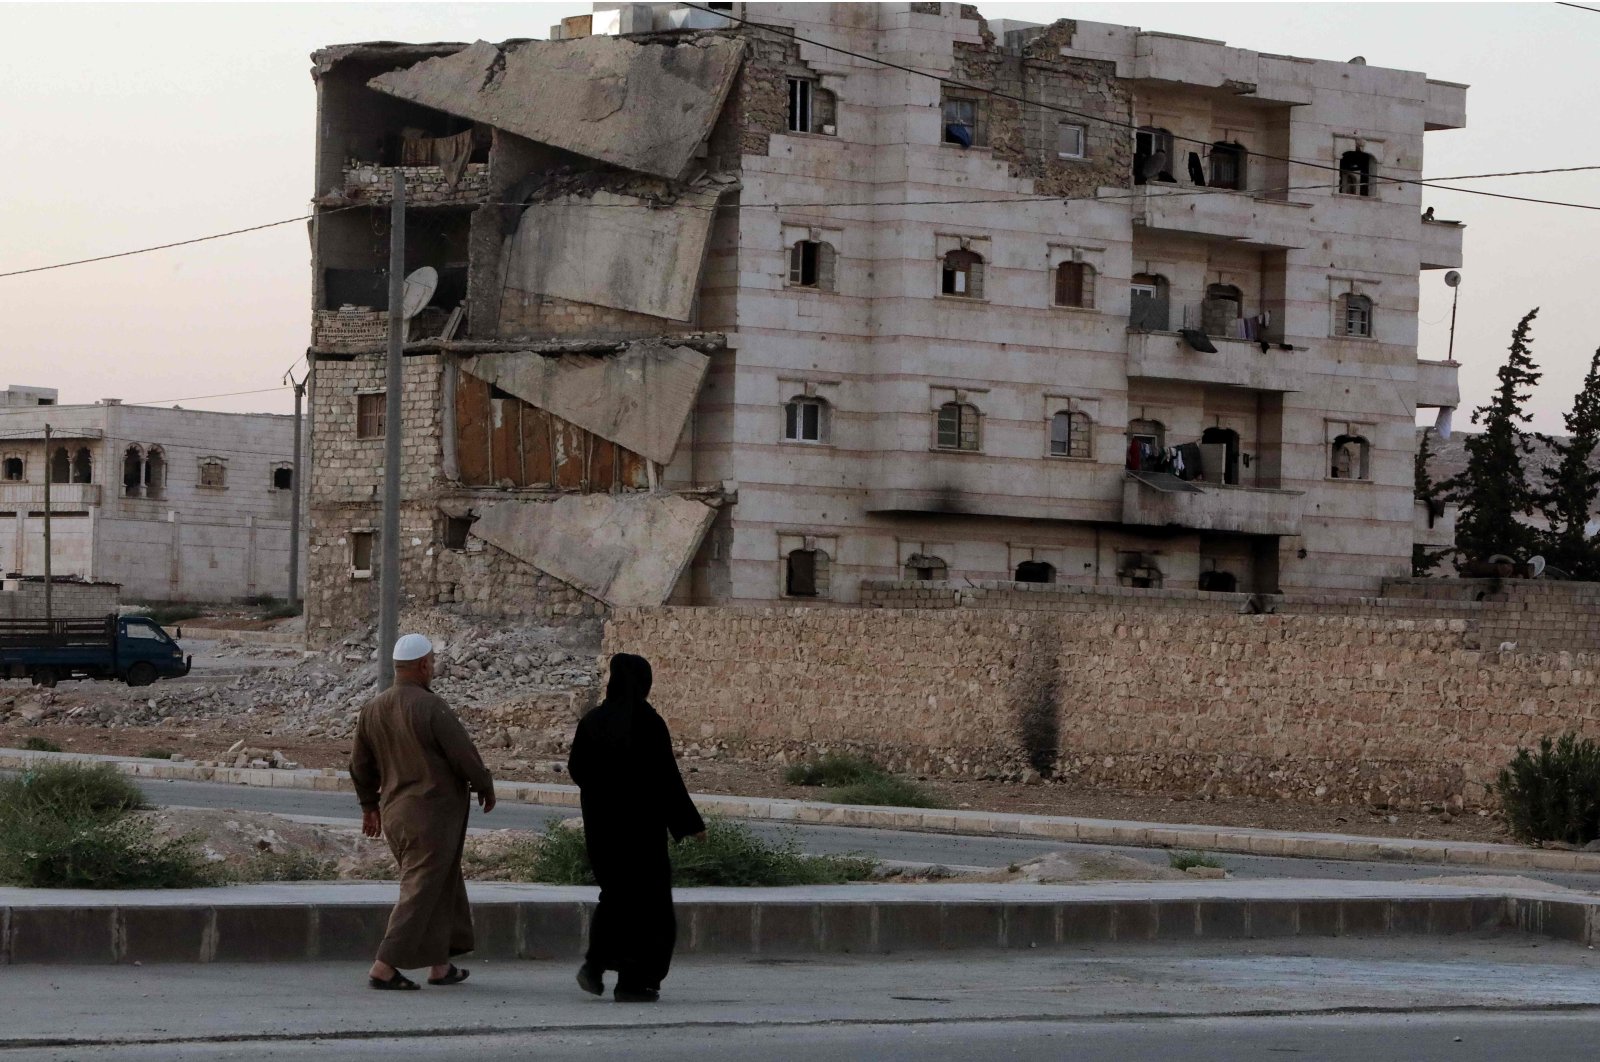 Syrians walk past a damaged building in the opposition-held city of al-Bab northwest of Aleppo in northern Syria, on June 23, 2021. (AFP Photo)